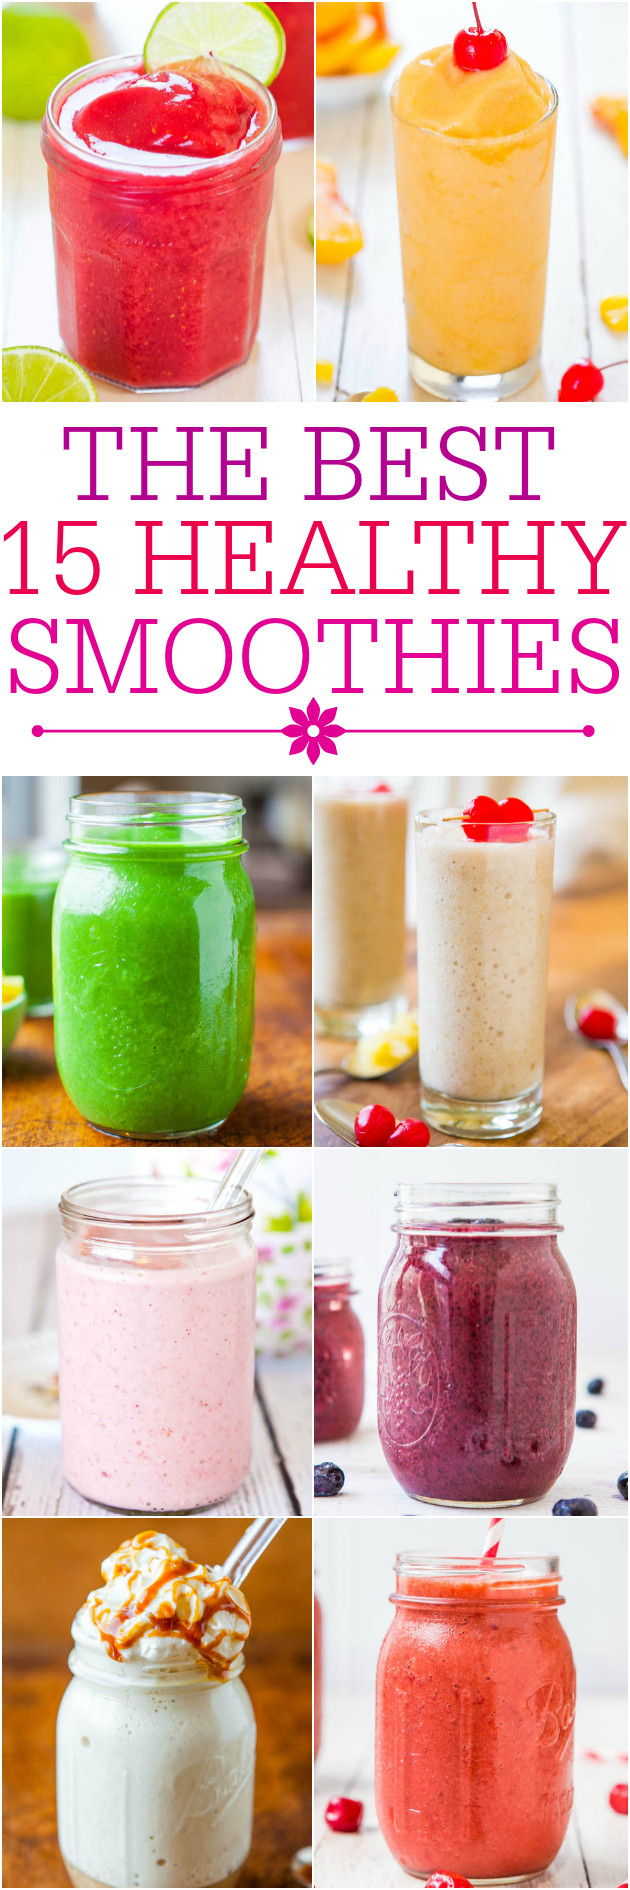 Best Healthy Smoothies
 Frozen Fruit Smoothie with Yogurt 3 Ingre nts